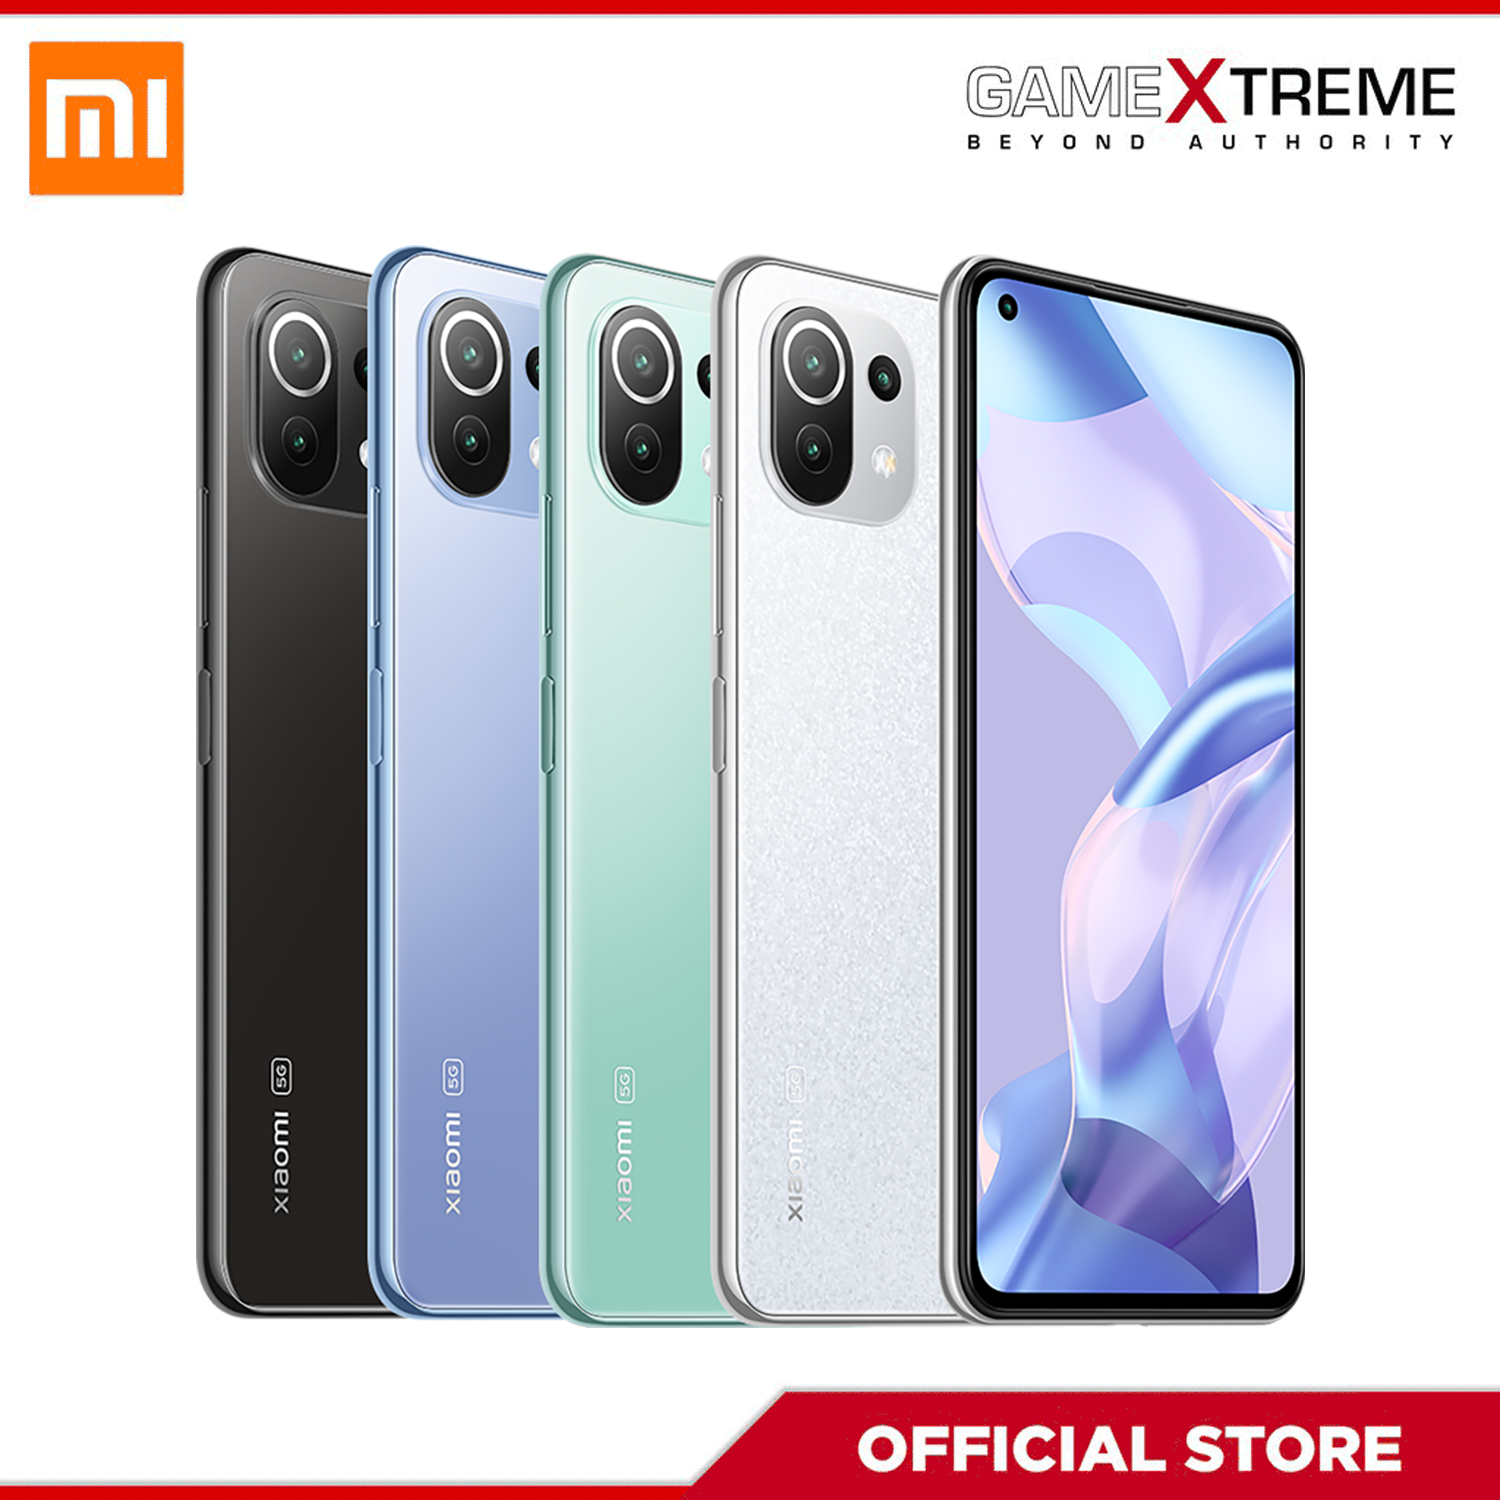 Xiaomi 11T Pro 2107113SI Celestial Blue 256GB 12GB RAM Gsm Unlocked Phone  Qualcomm SM8350 Snapdragon 888 5G 108MP The phone comes with a 6.67-inch  touchscreen display with a resolution of 1080x2400 pixels